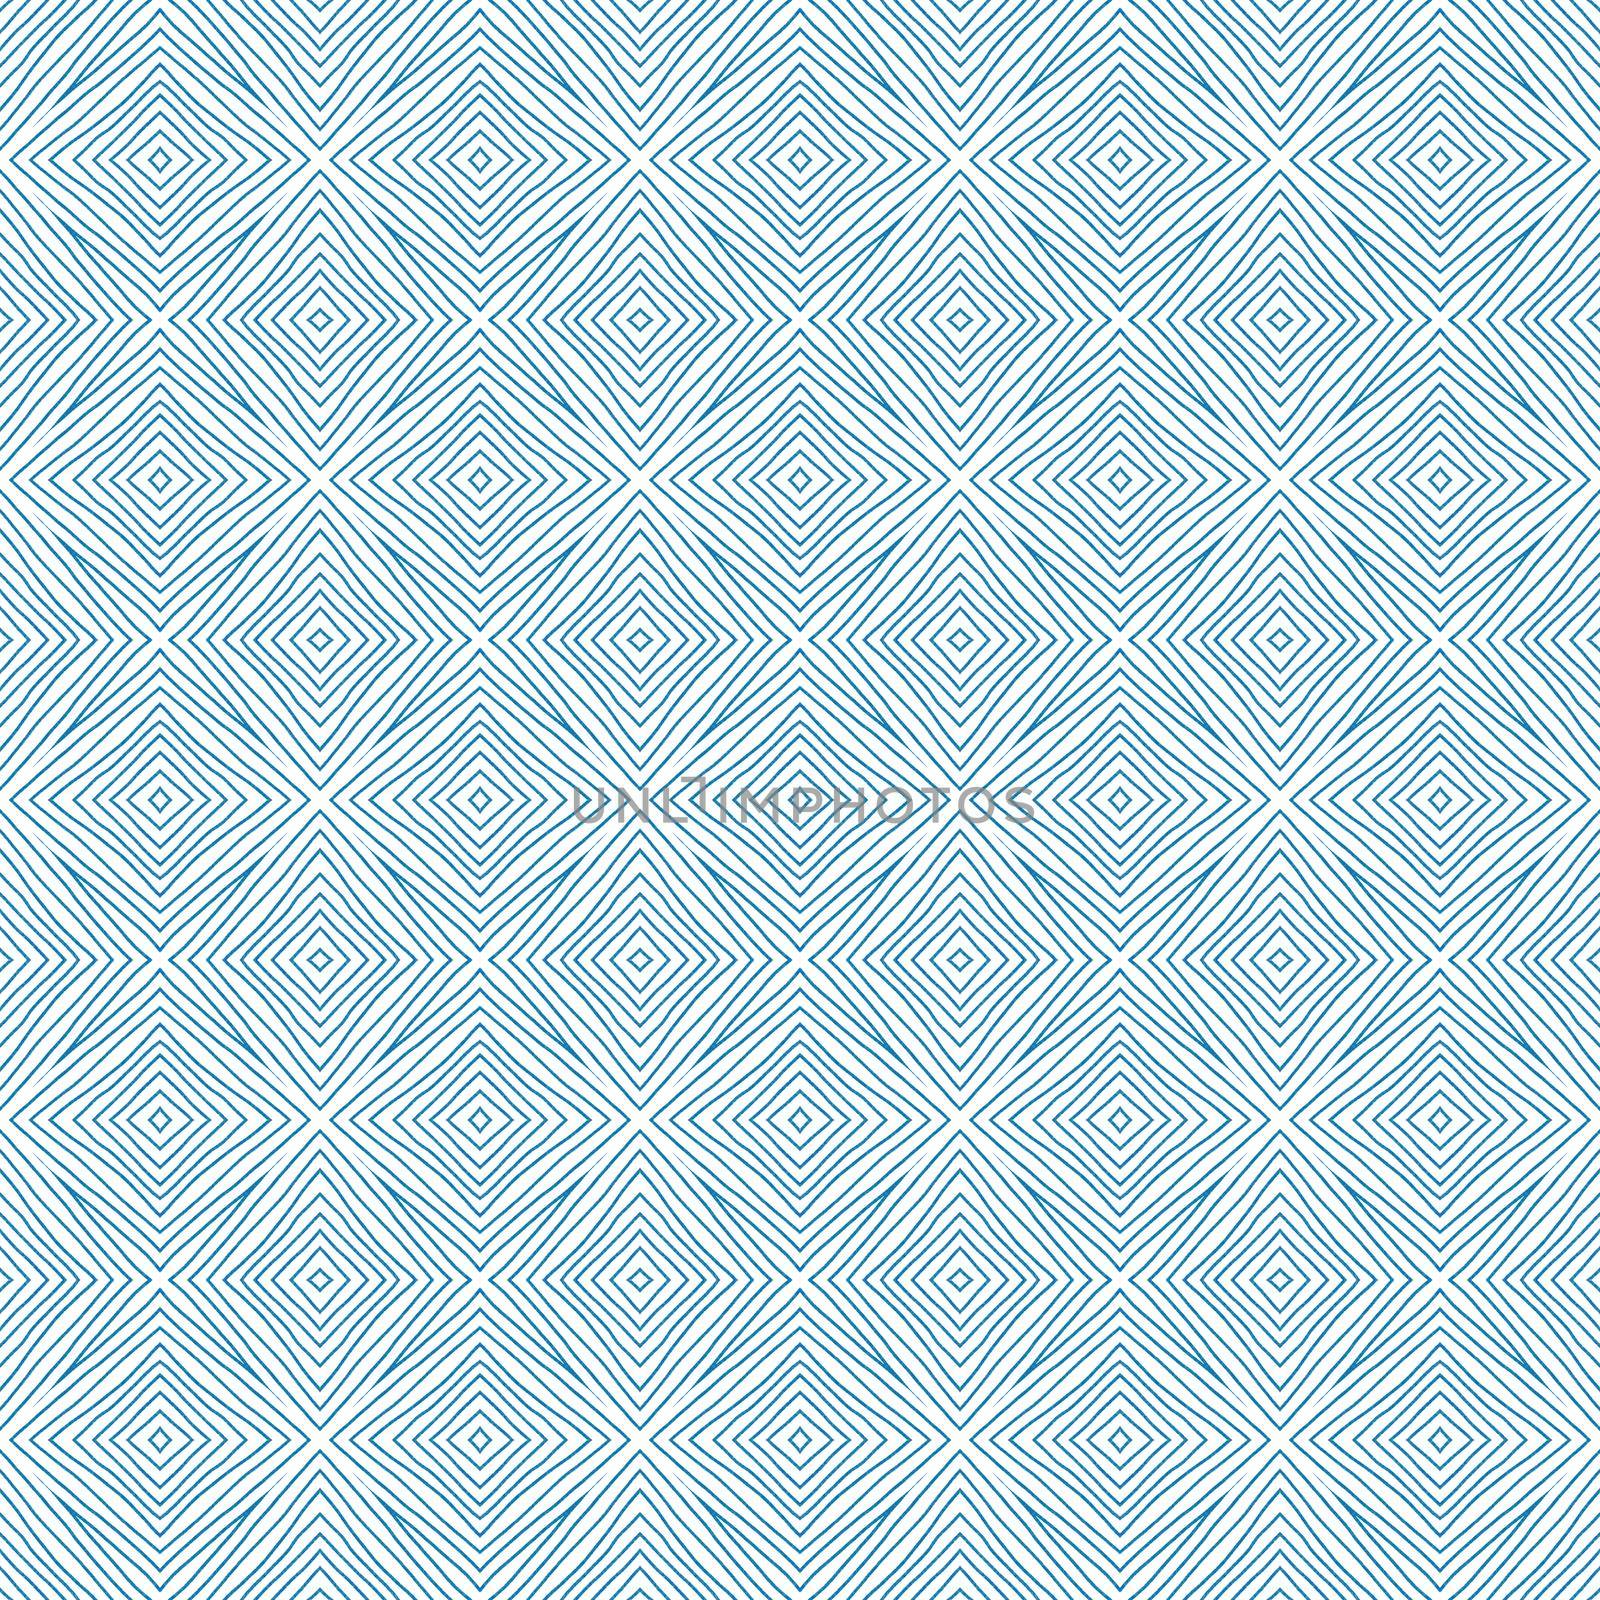 Tiled watercolor pattern. Blue symmetrical kaleidoscope background. Hand painted tiled watercolor seamless. Textile ready charming print, swimwear fabric, wallpaper, wrapping.